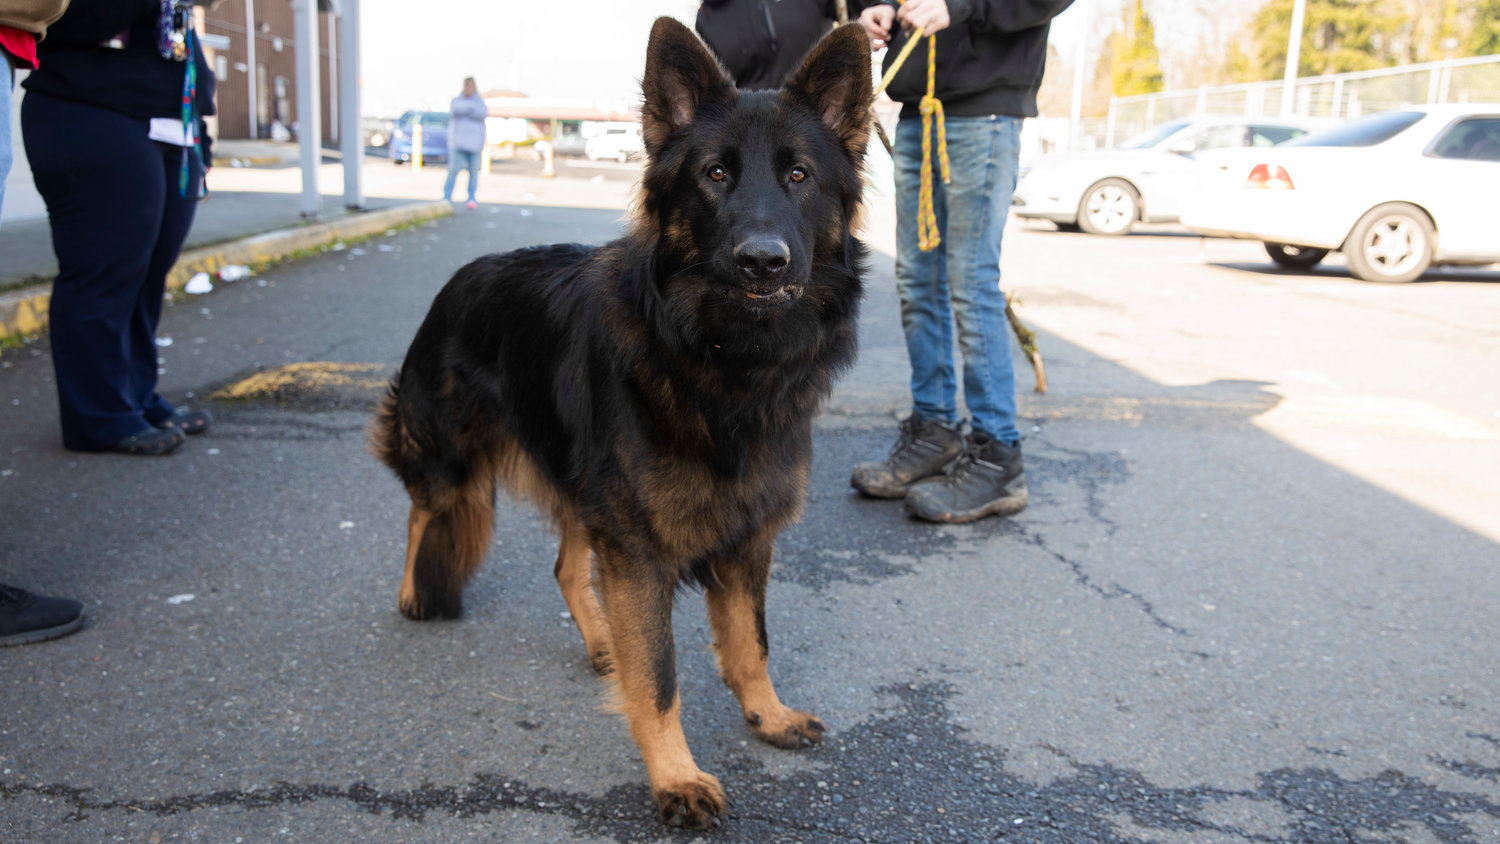 Monte, a German Shepherd, walks around the OYO Hotel in Centralia with residents on Thursday.